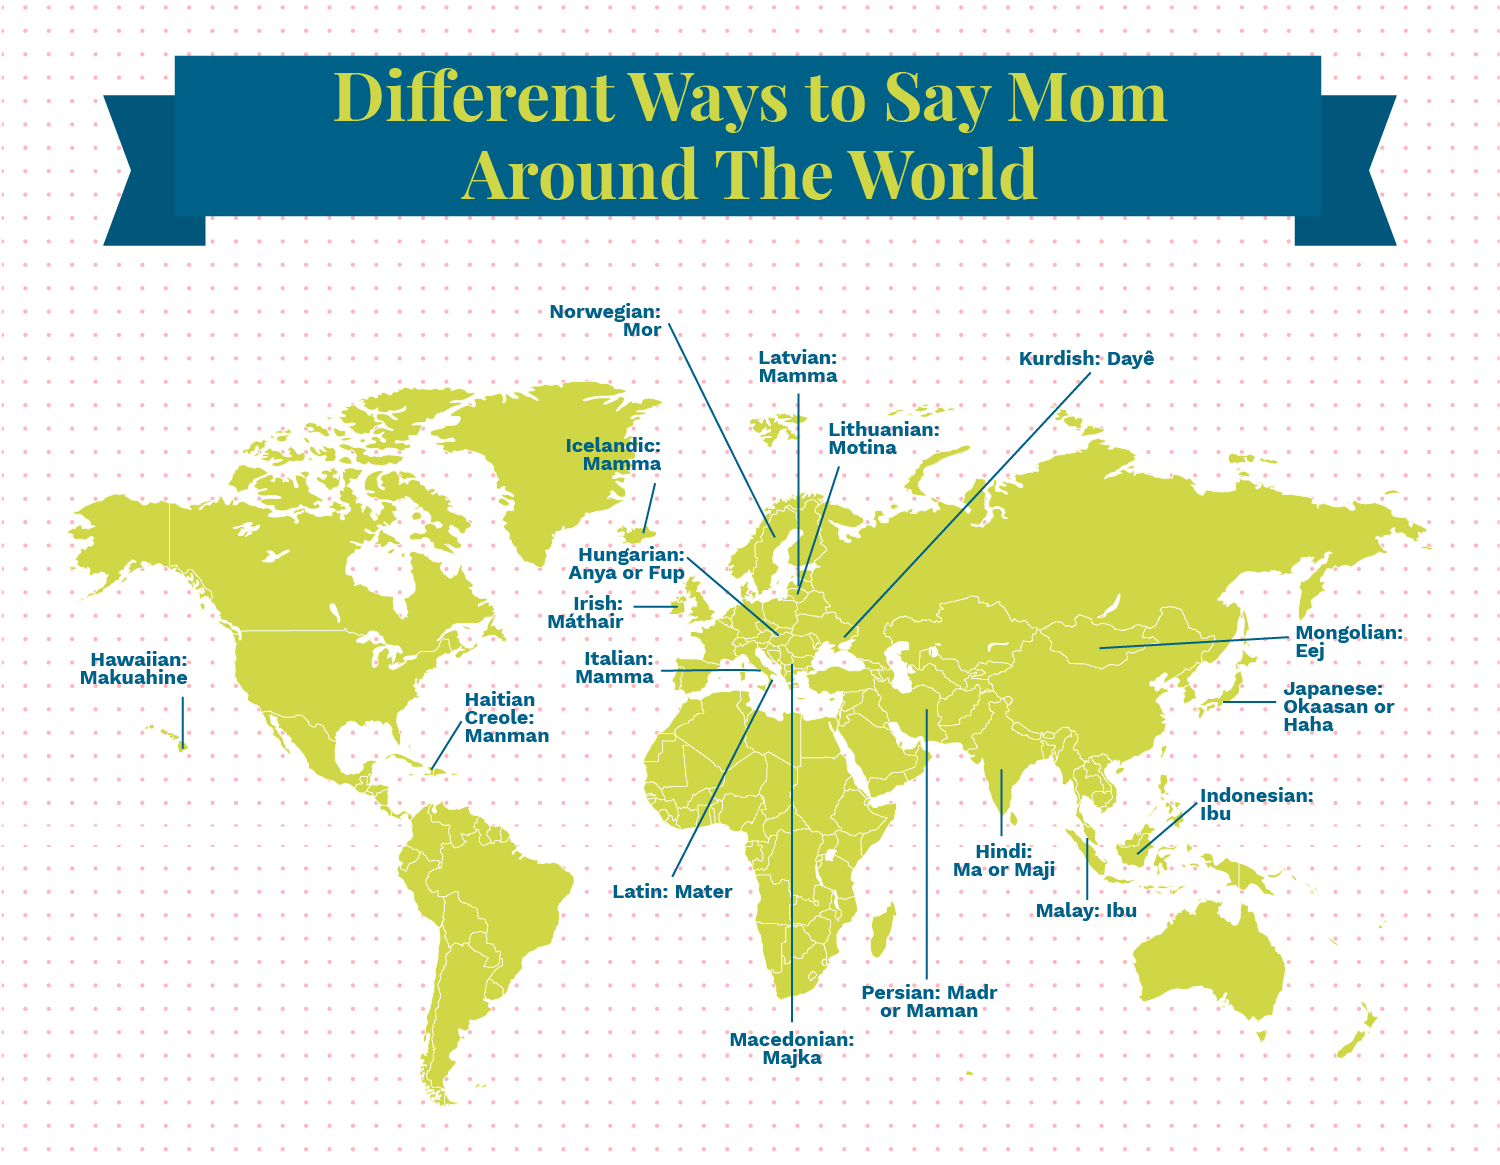 56 Different Ways to Say “Mom”